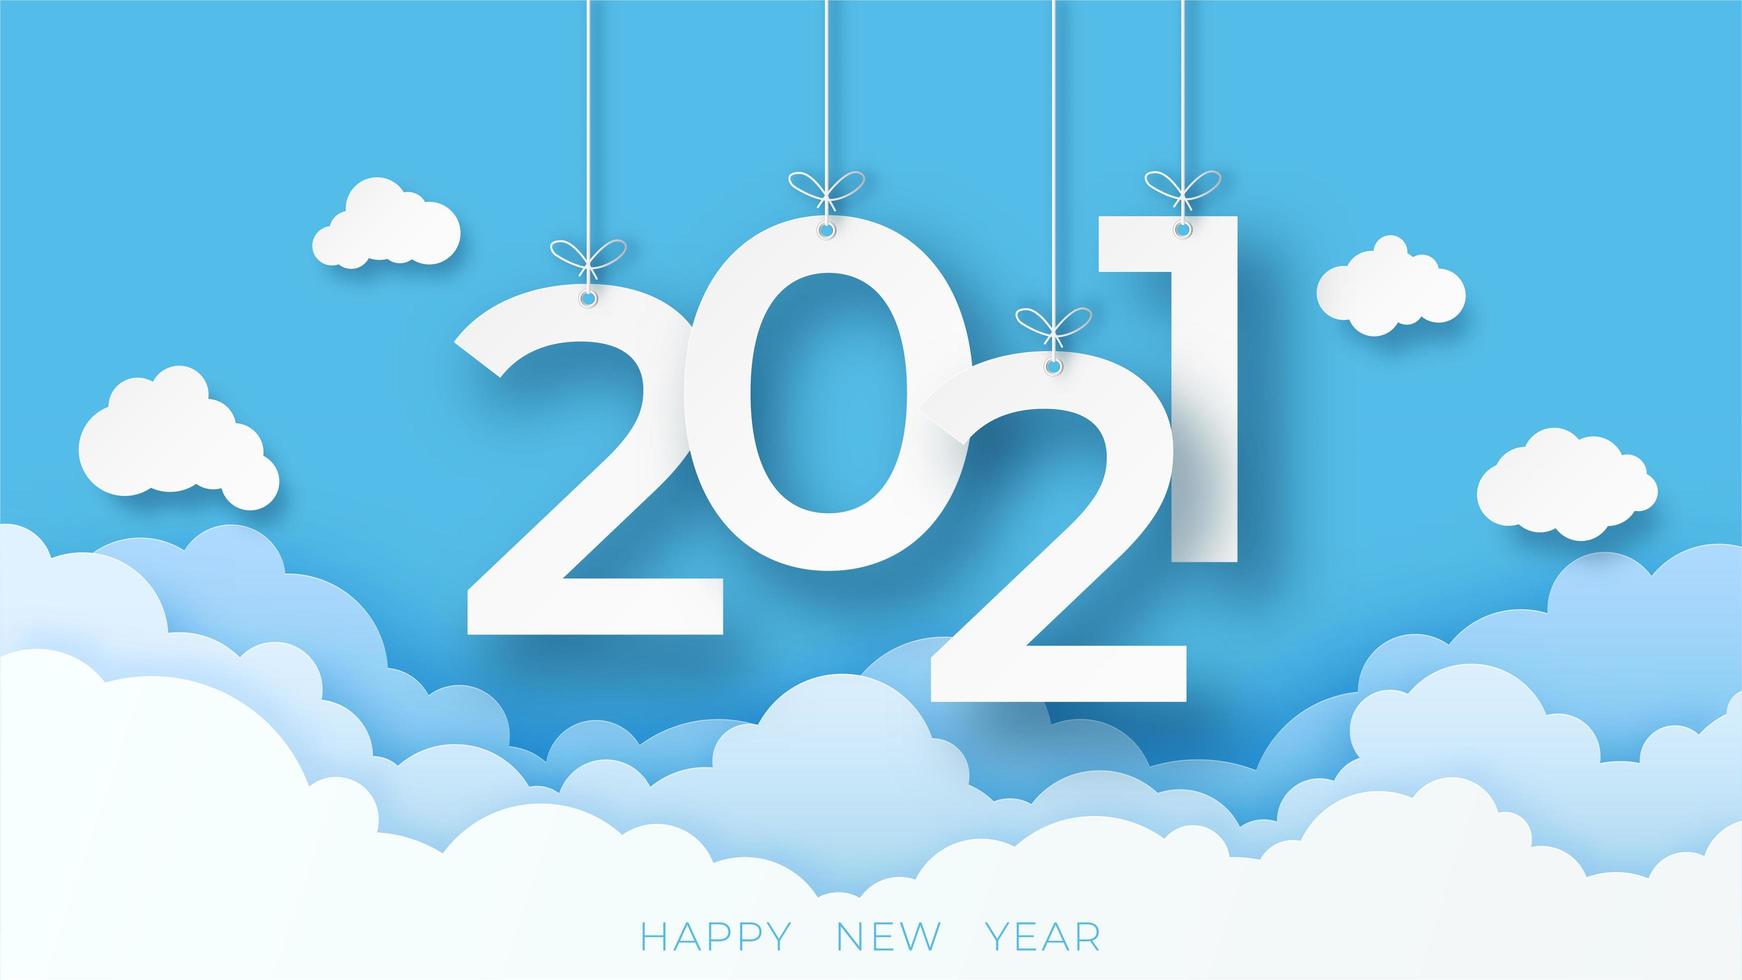 Happy New Year 2021 banner with paper cut style clouds vector